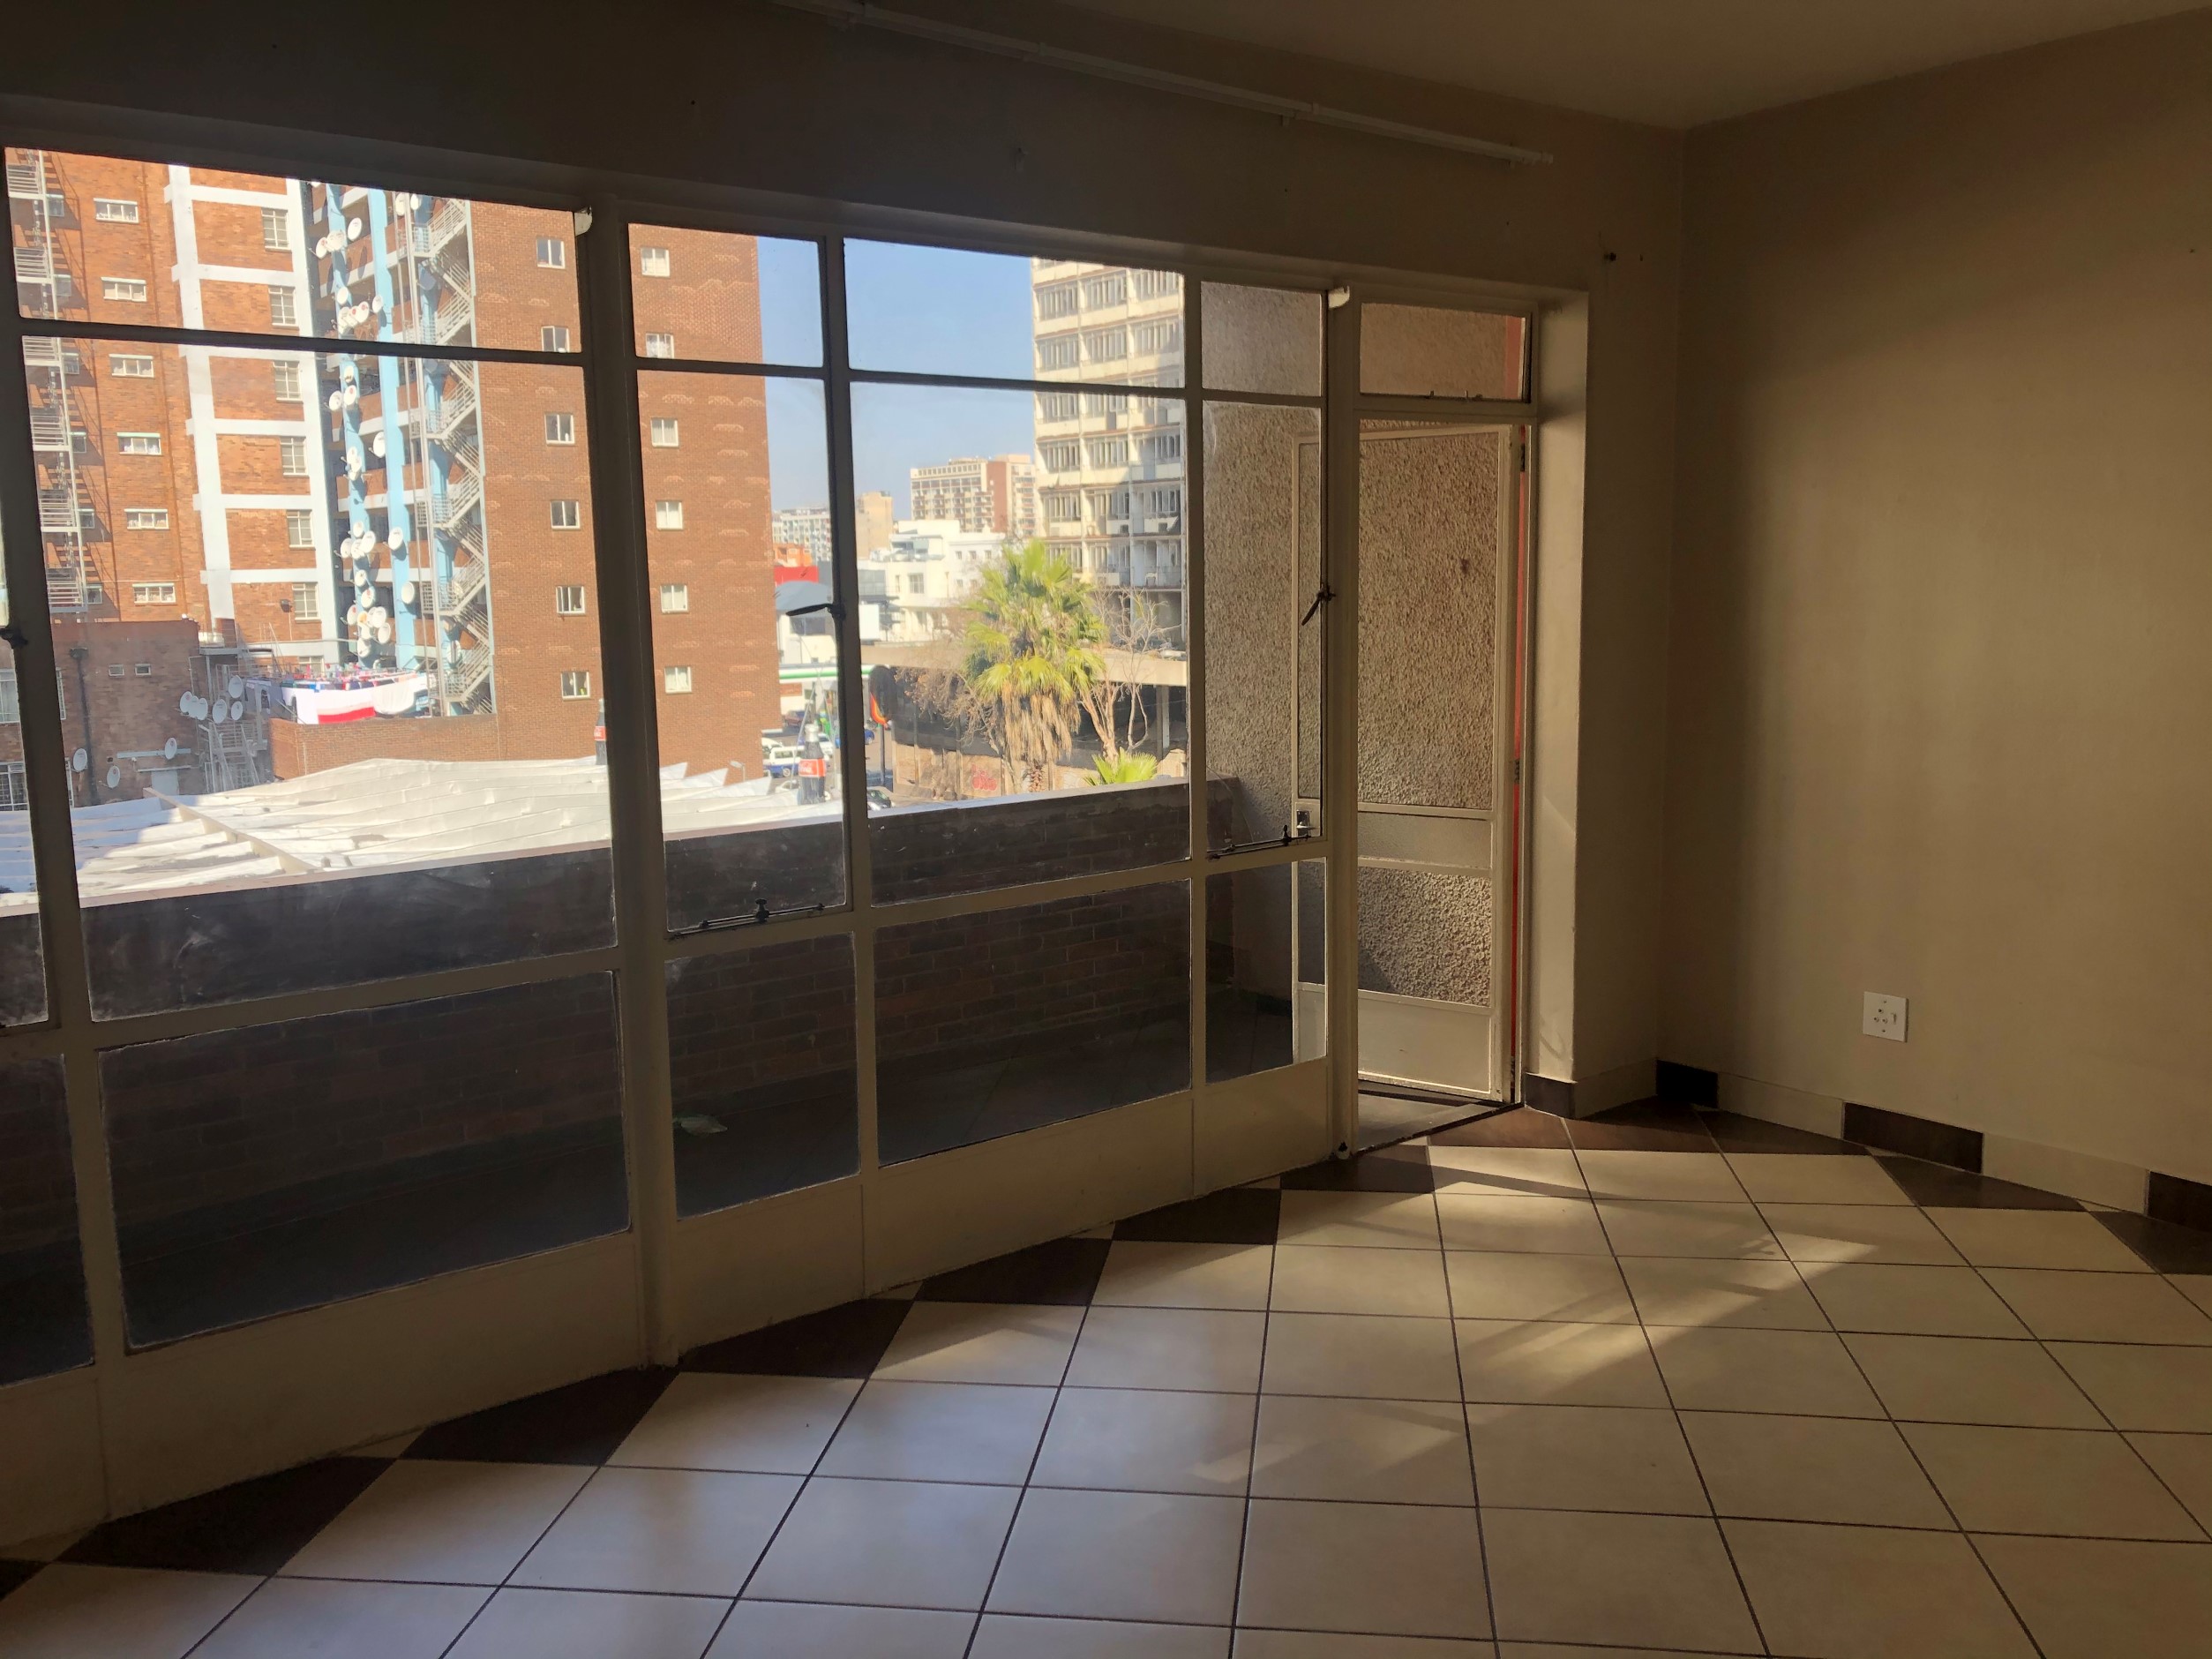 A NEAT 1 BEDROOM FLAT IS AVAILBLE AT GRANAD COURT , HILLBROW